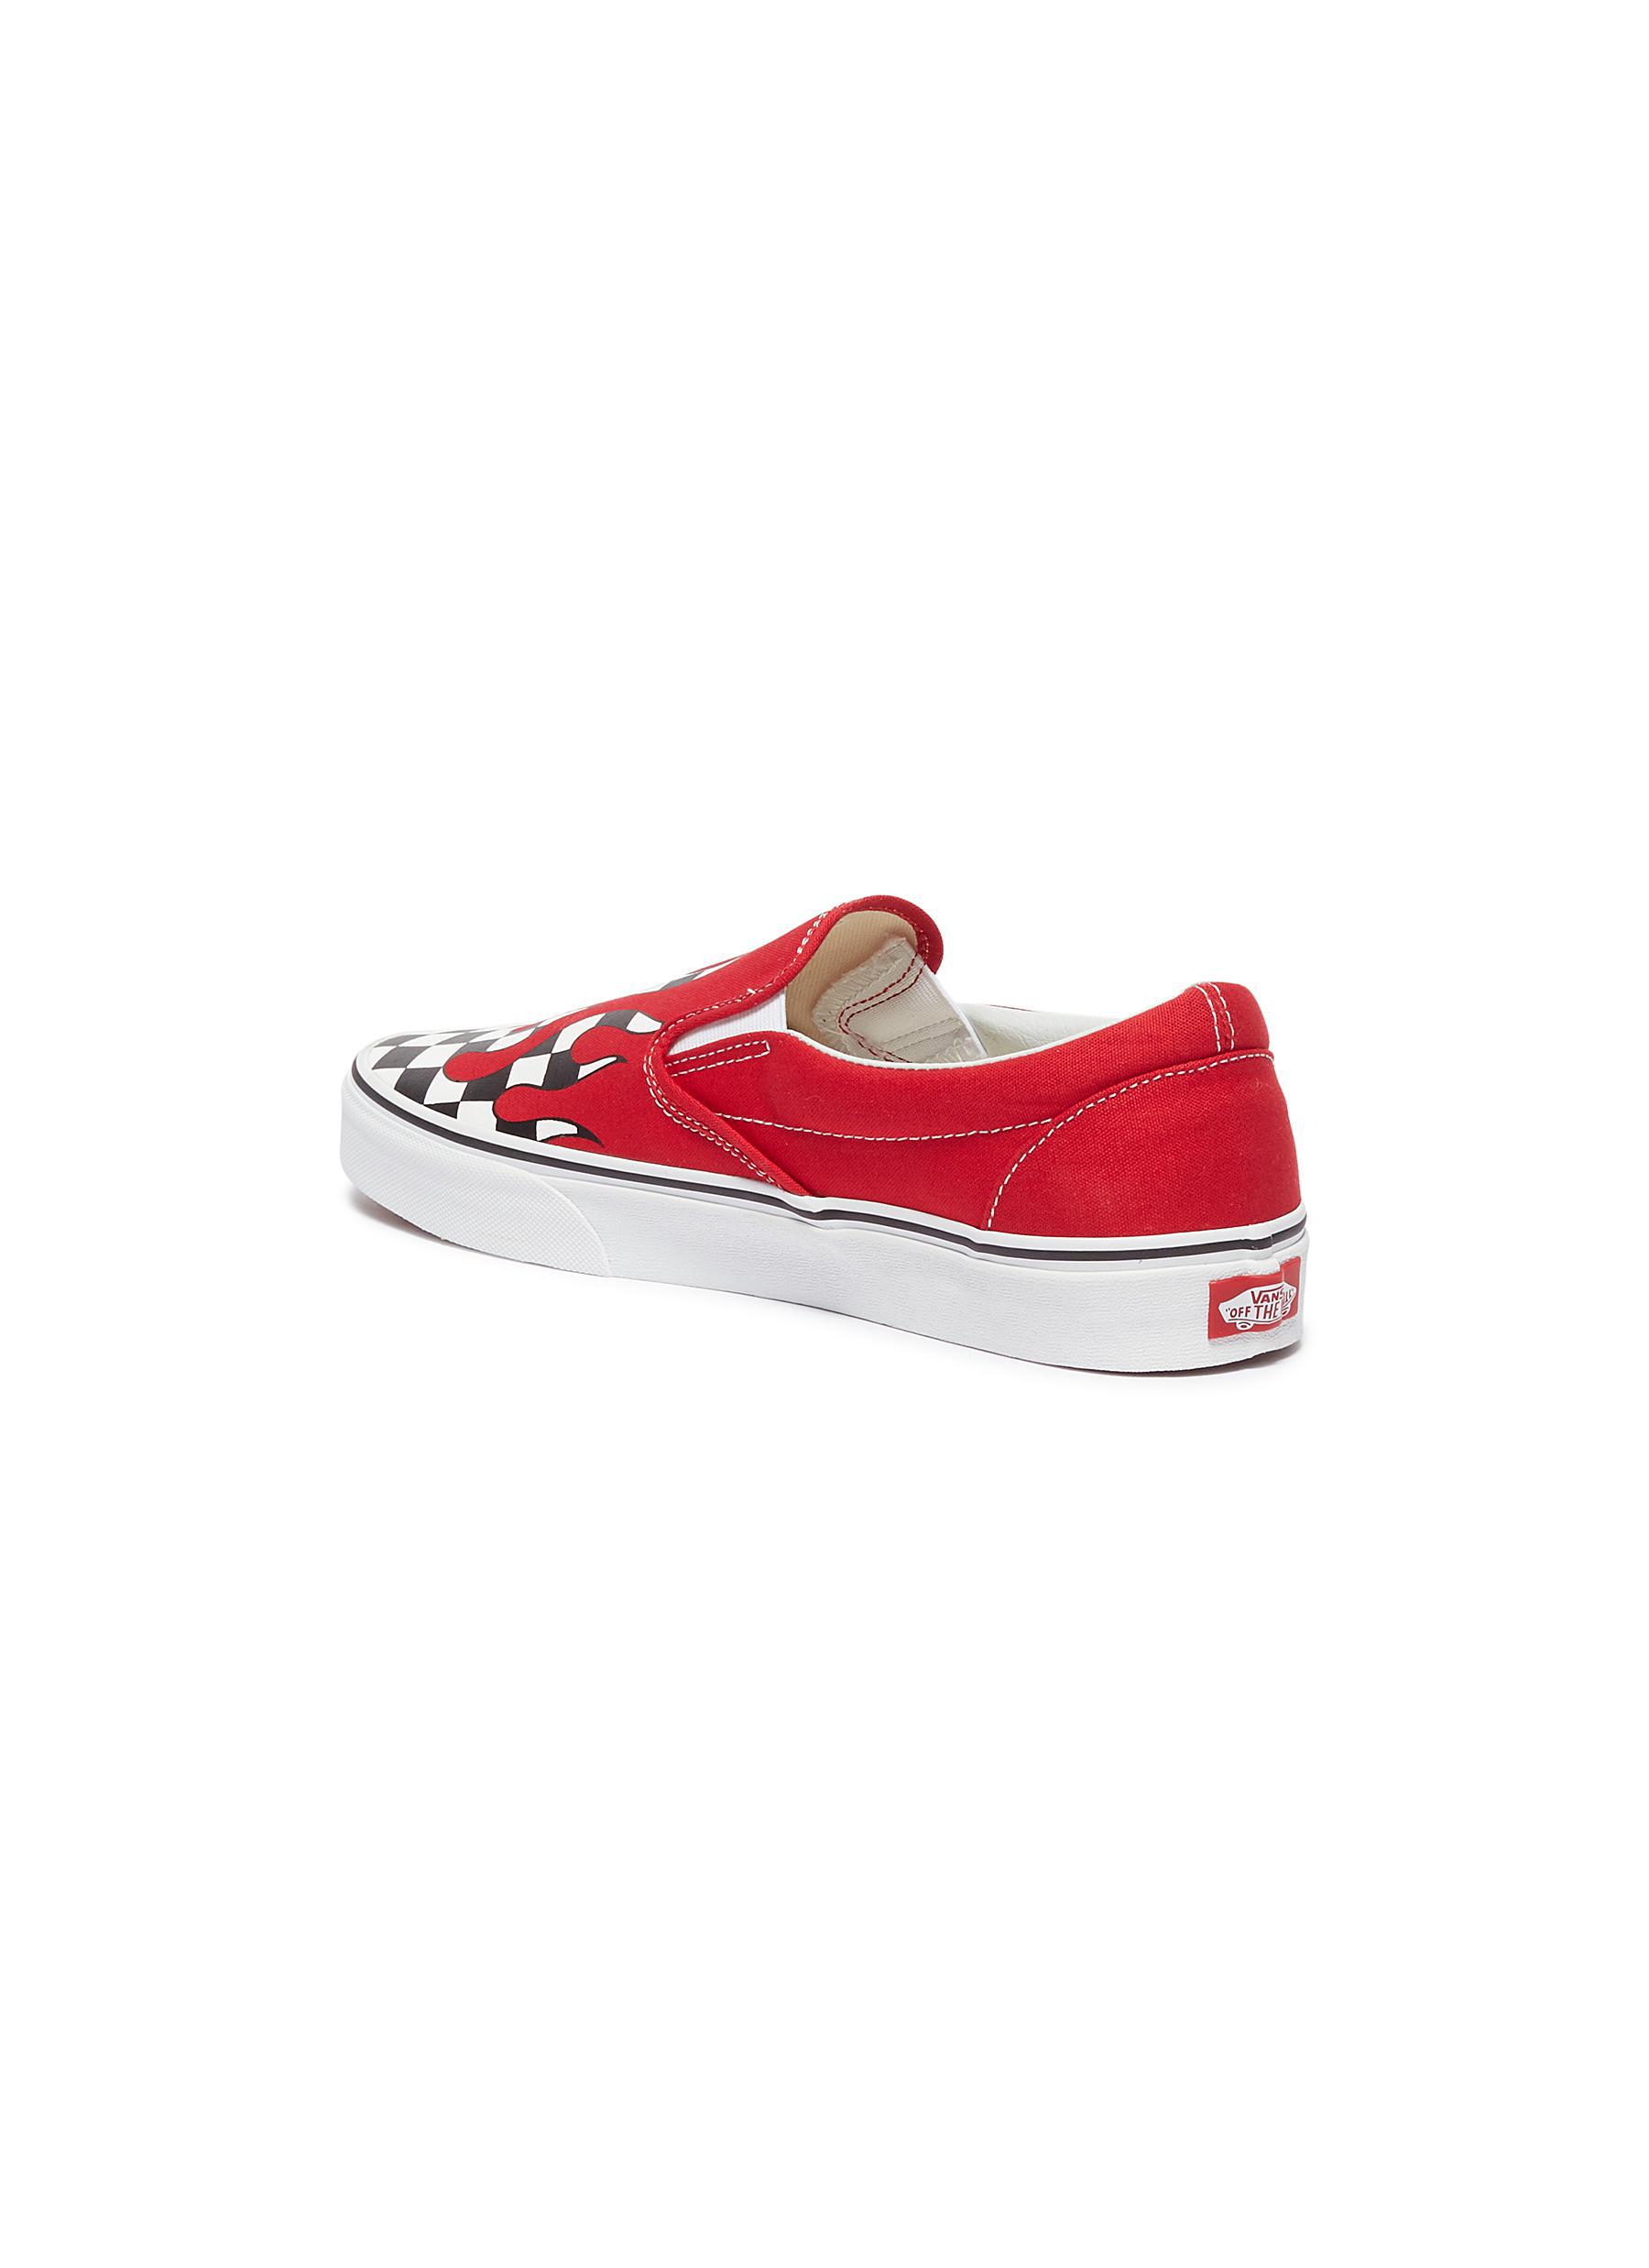 Vans 'classic Slip-on' Checkerboard Flame Canvas Skates in Red for Men |  Lyst